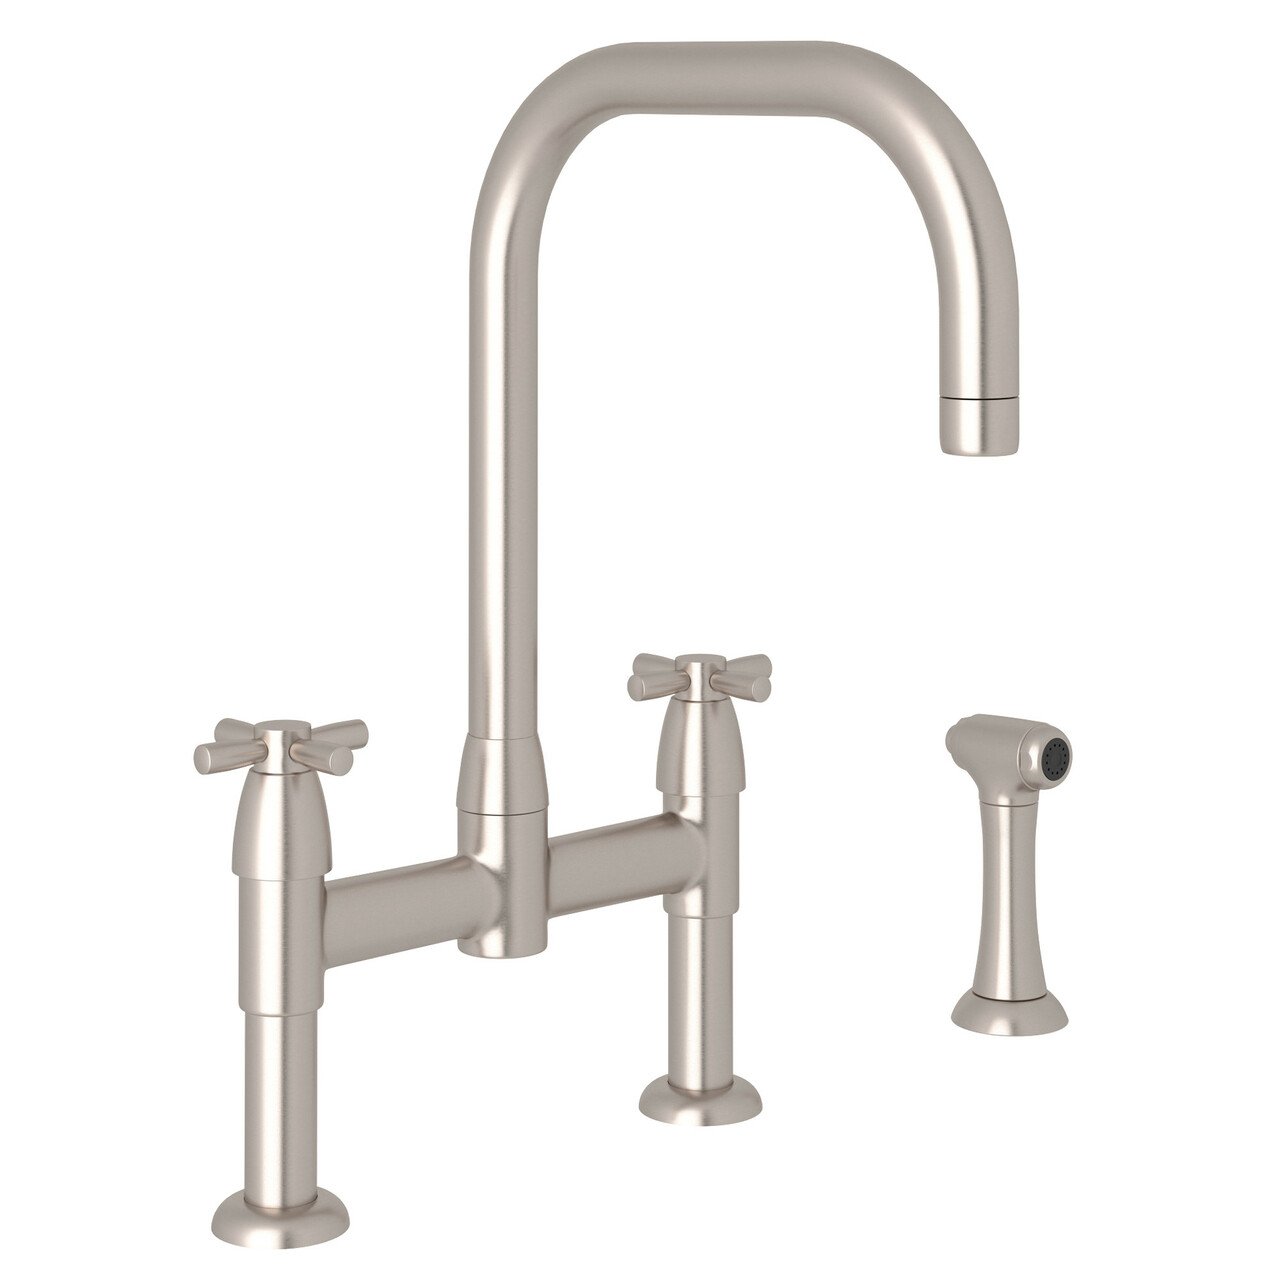 Perrin & Rowe Holborn U-Spout Bridge Kitchen Faucet with Sidespray - BNGBath